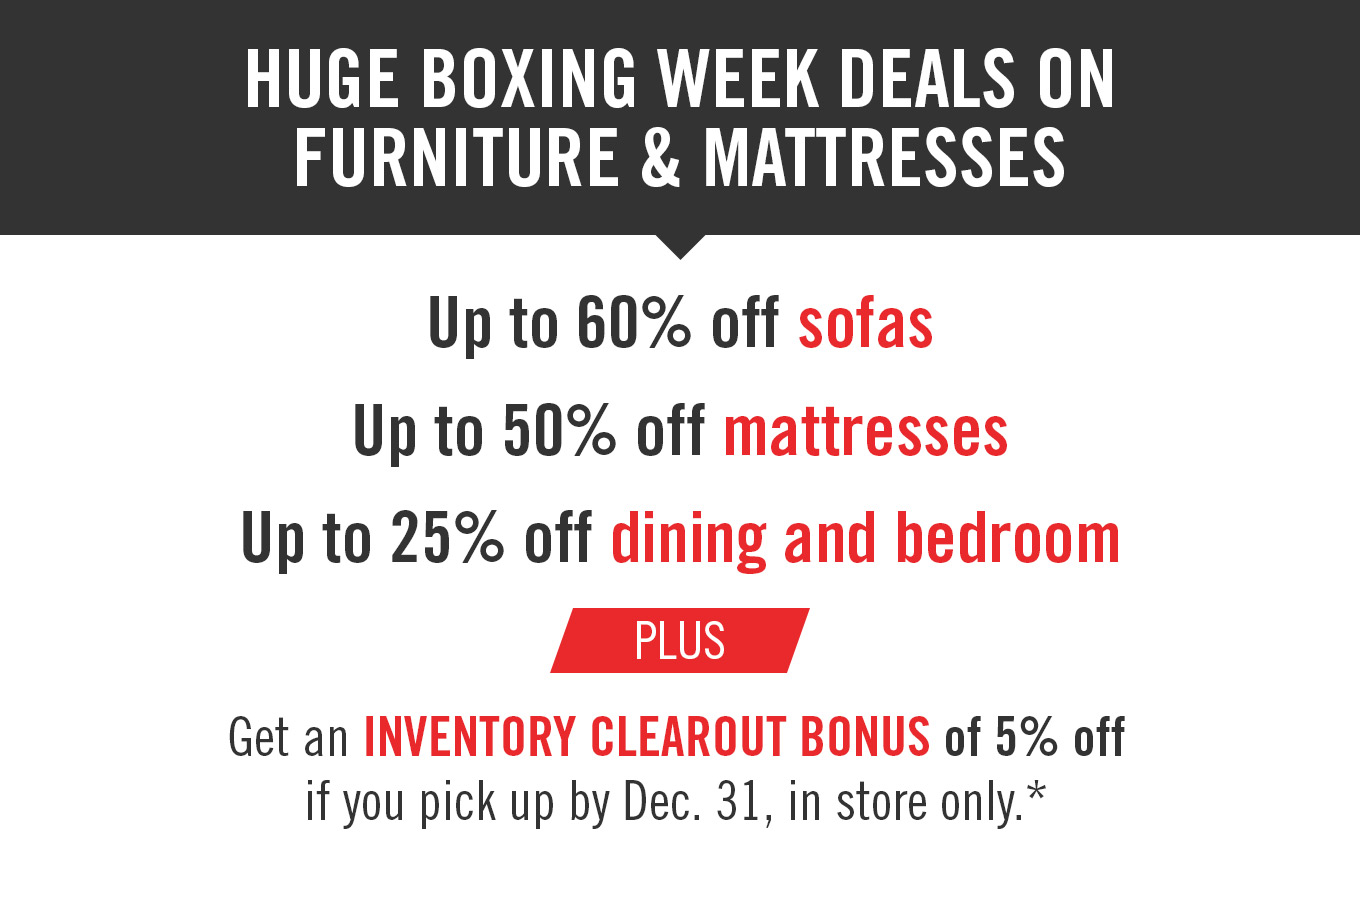 Huge Boxing Week deals on furniture and mattresses.